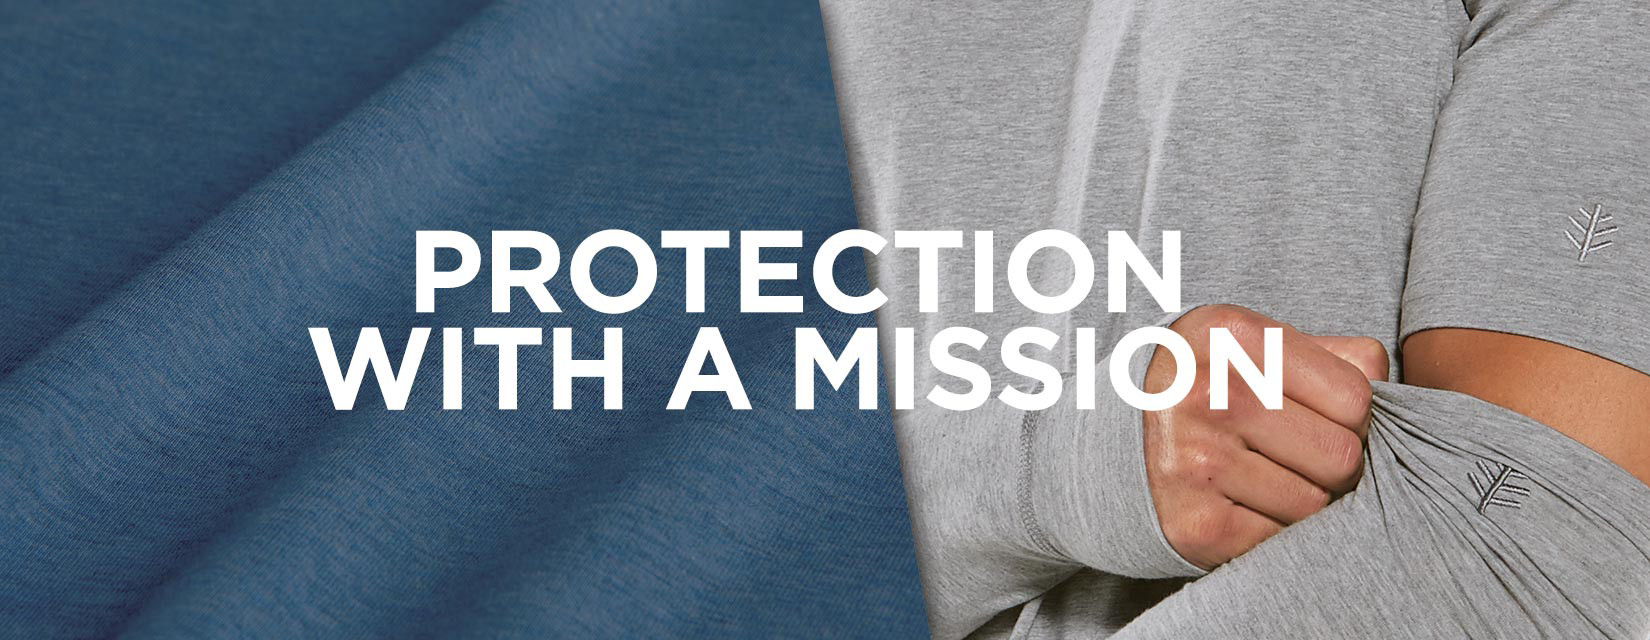 Protection with a mission